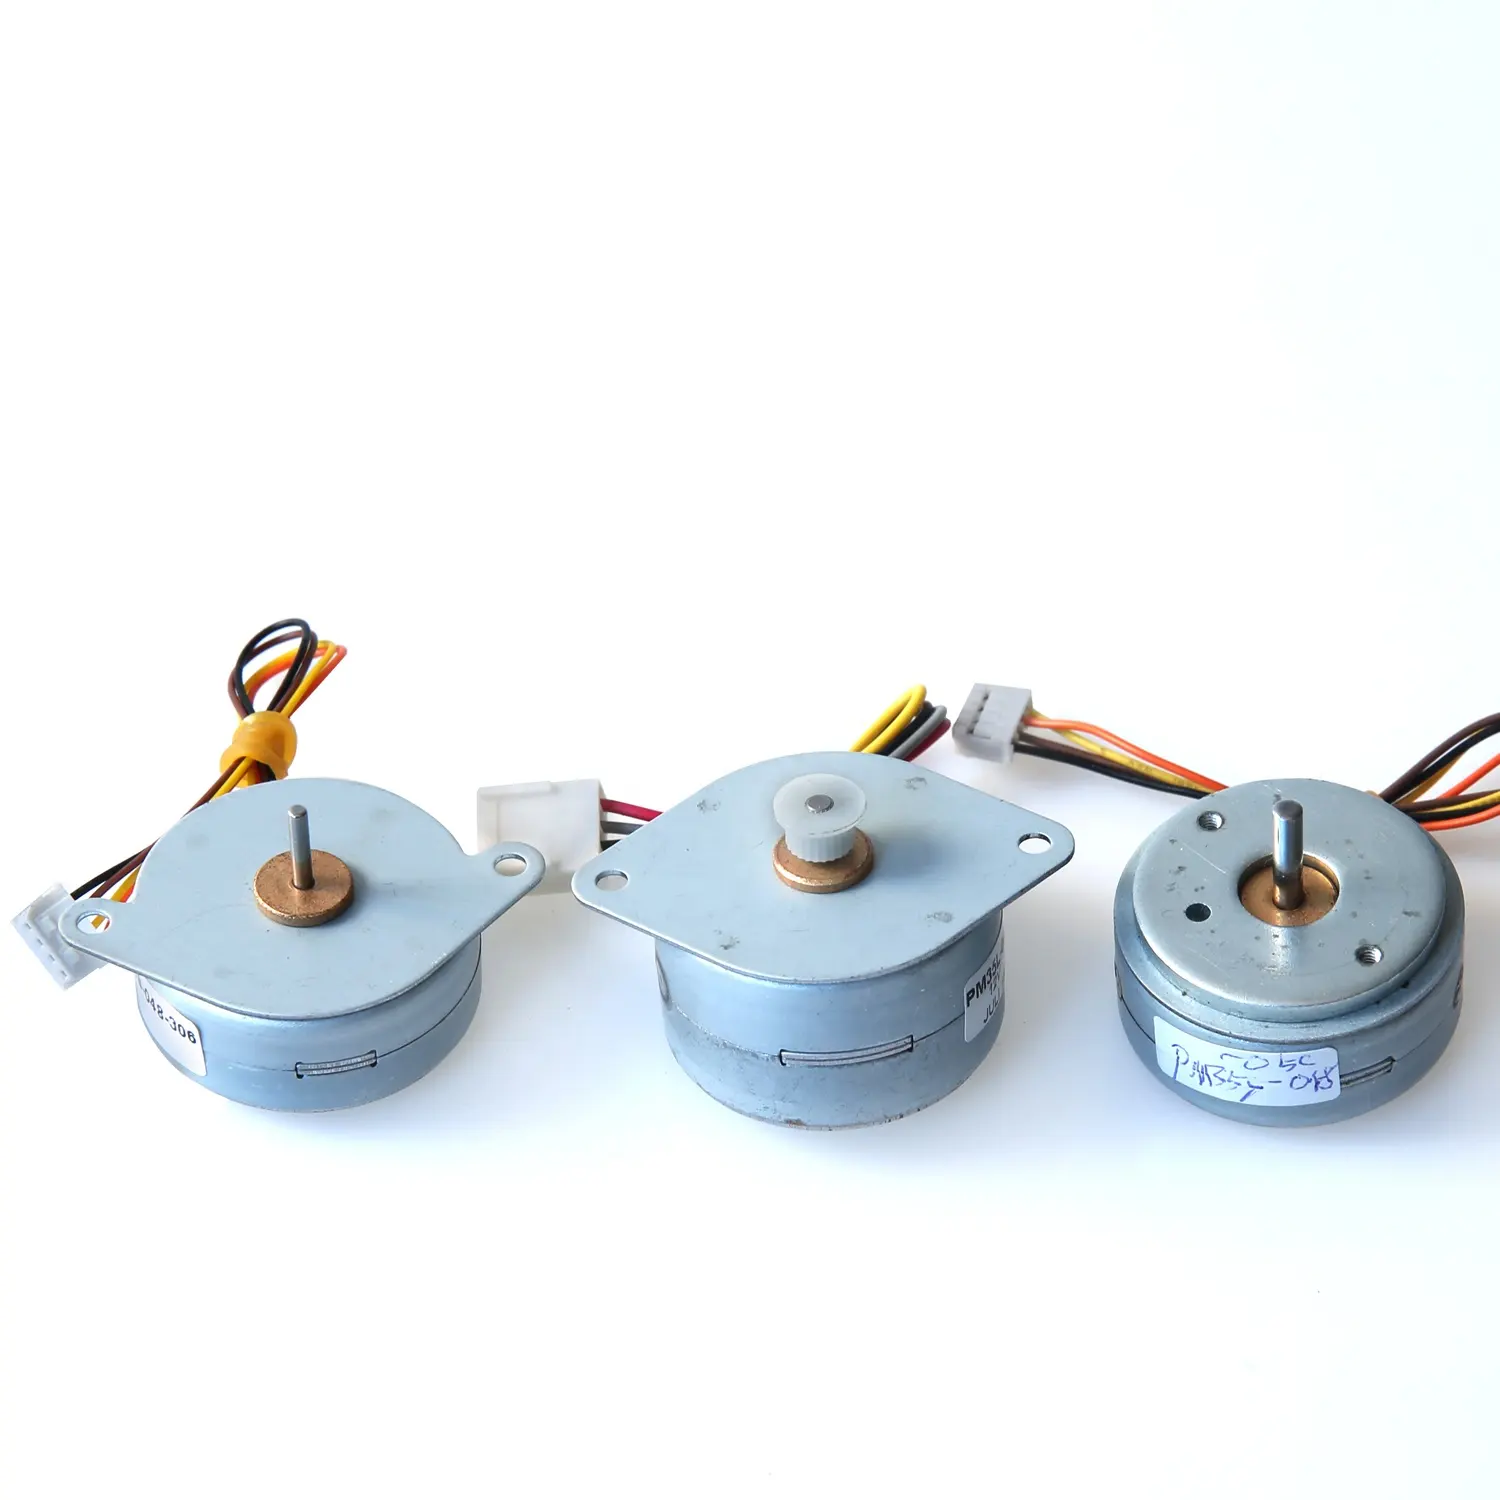 PM 24v ac motor synchronous 250 rpm synchronous motor